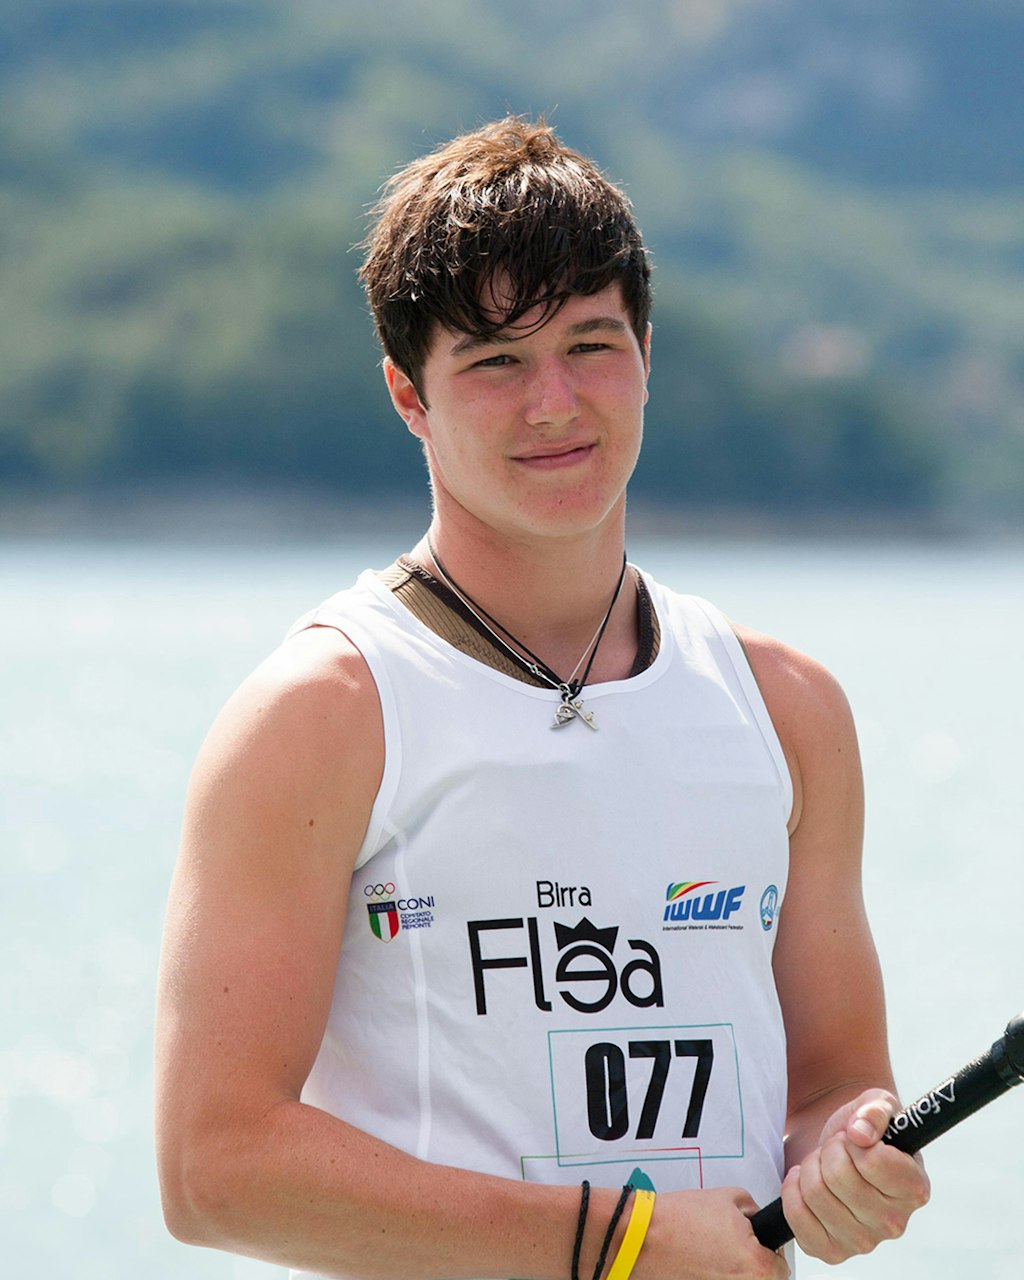 Mitch Wise at the 2018 Euros Italy